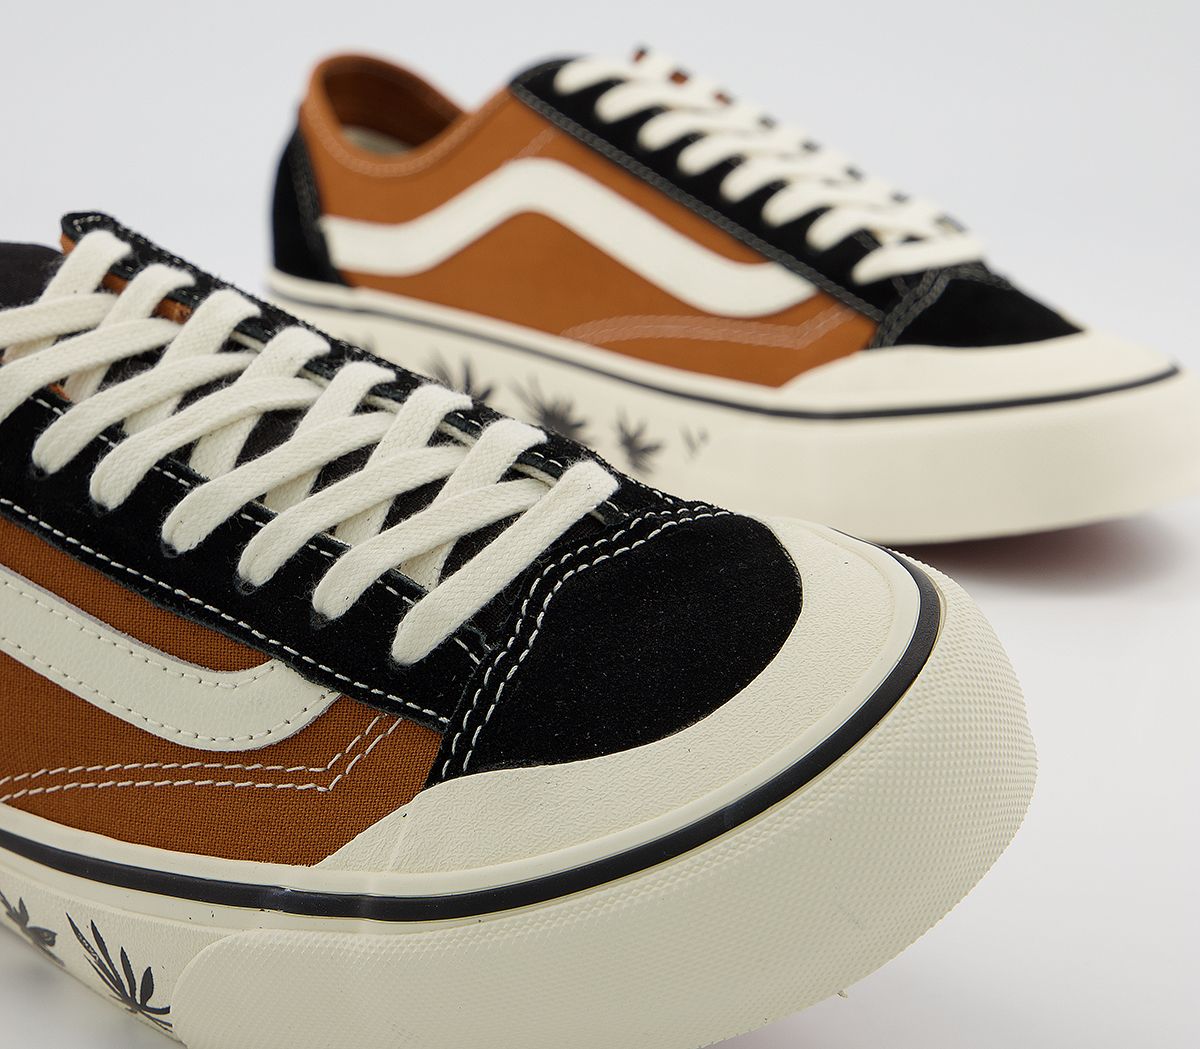 Vans Style 36 Decon Sf Trainers Pumpkin Spice Antique White - His trainers